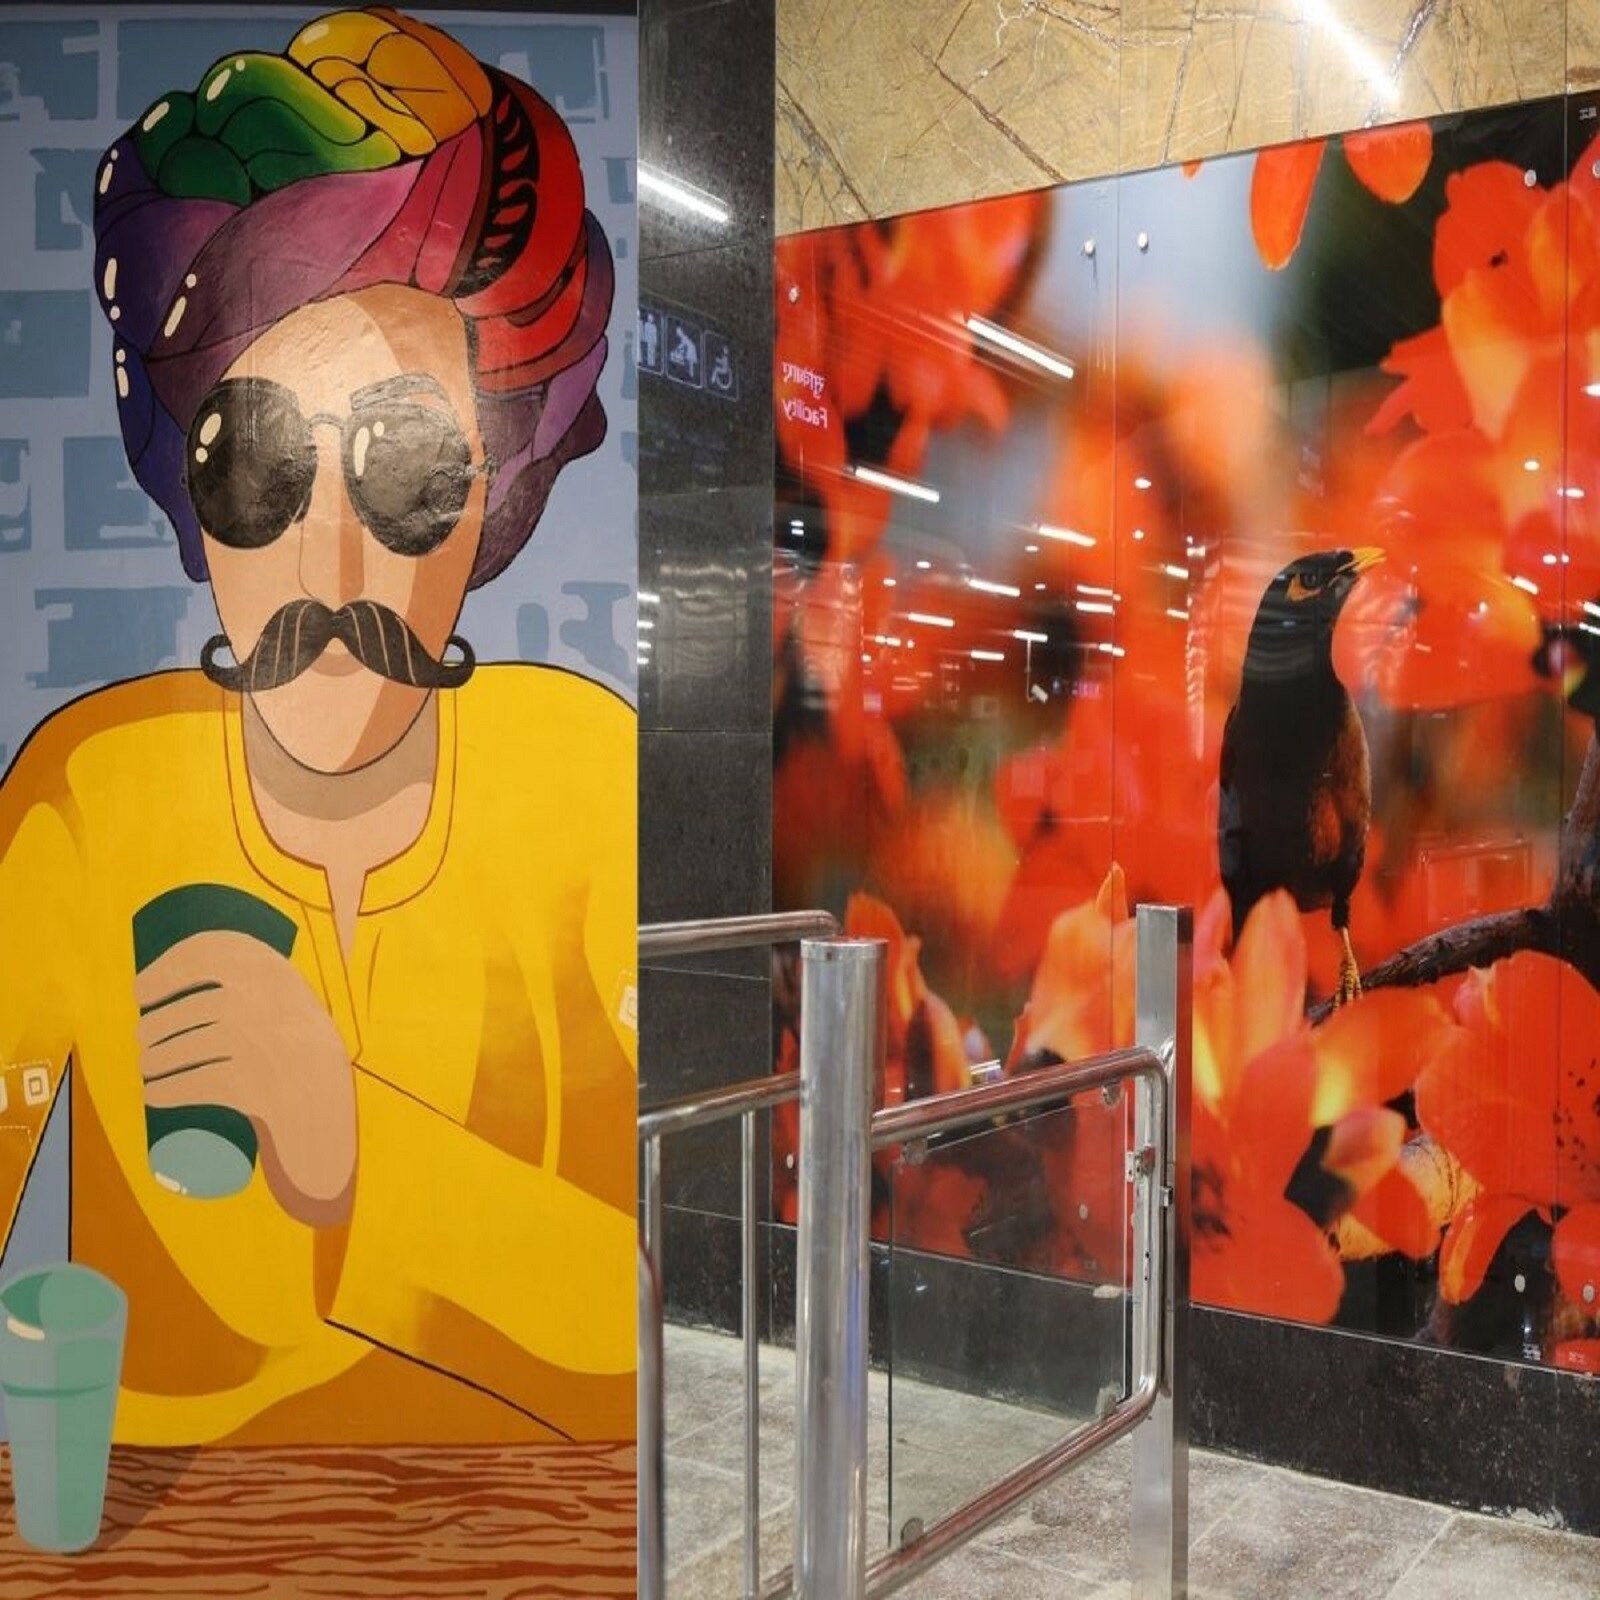 Delhi's Dhamsa Metro Station Decked Up in Local Art Illustrating Culture, Folklore